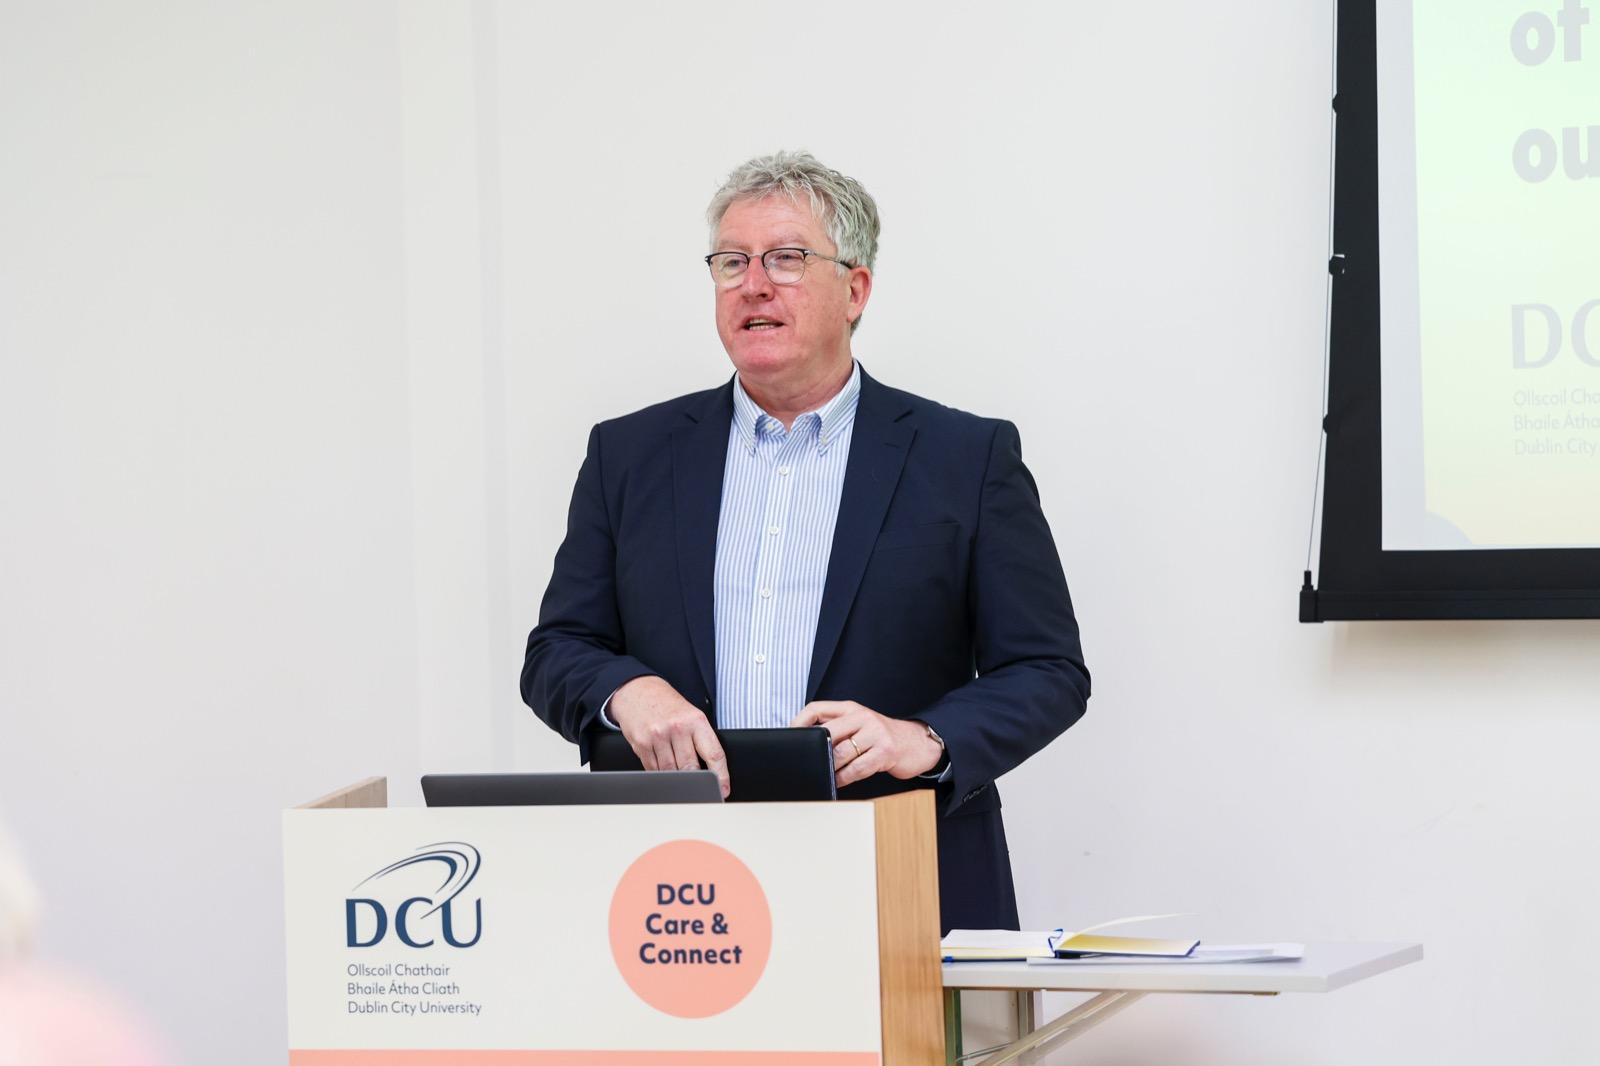 DCU President Prof Daire Keogh speaking at the launch of Care & Connect